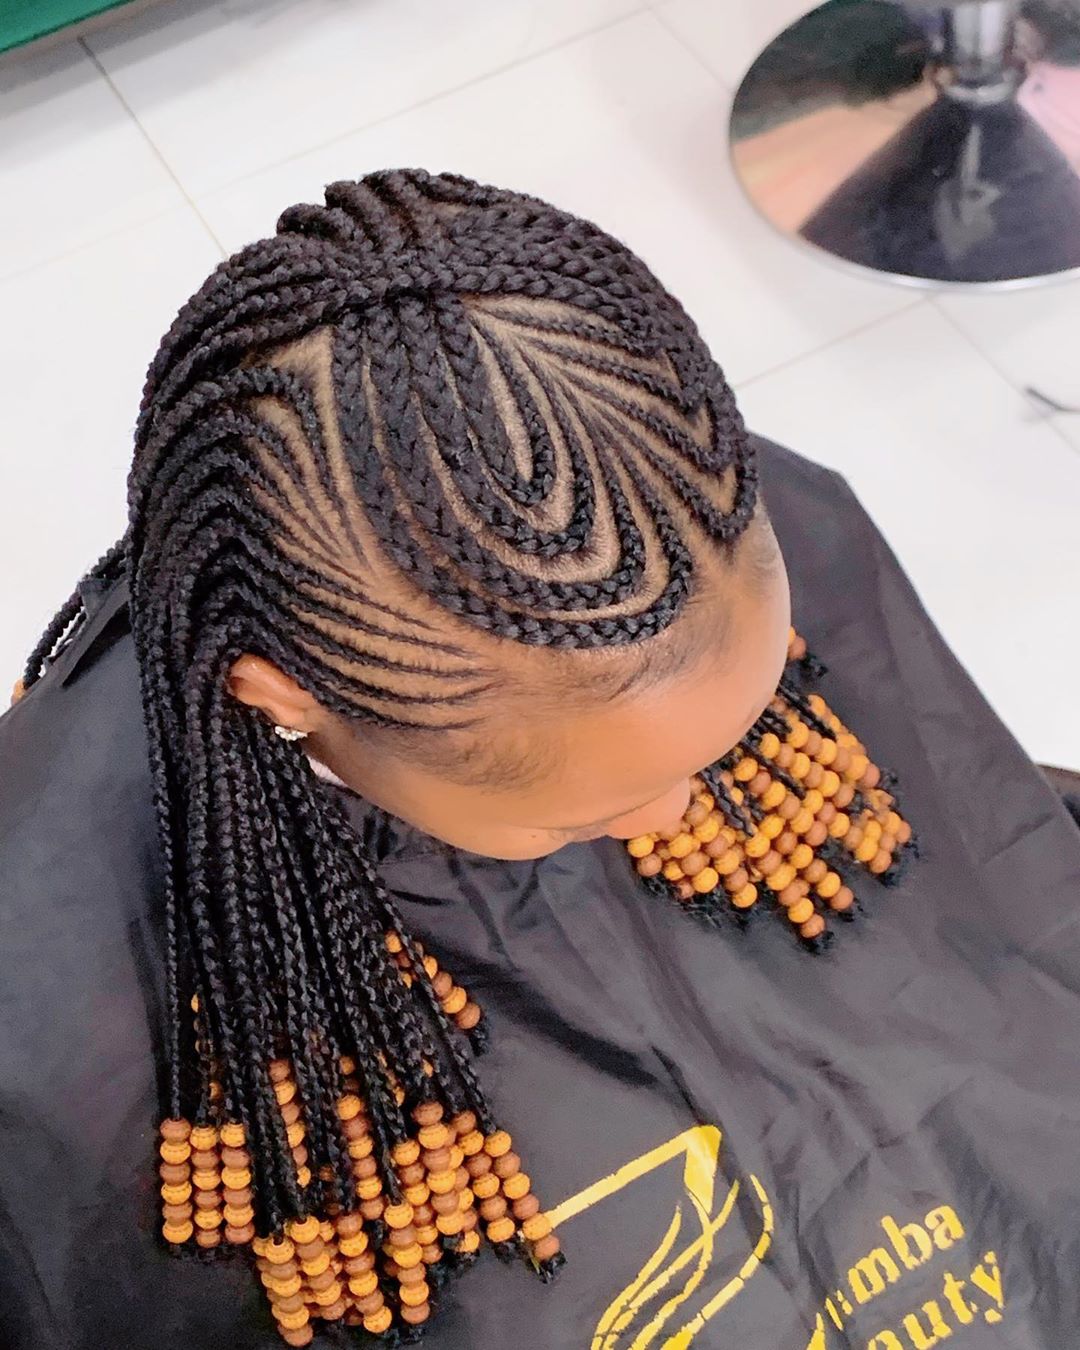 Best African Braided Hairstyles That Will Make You Want To Call Your ...